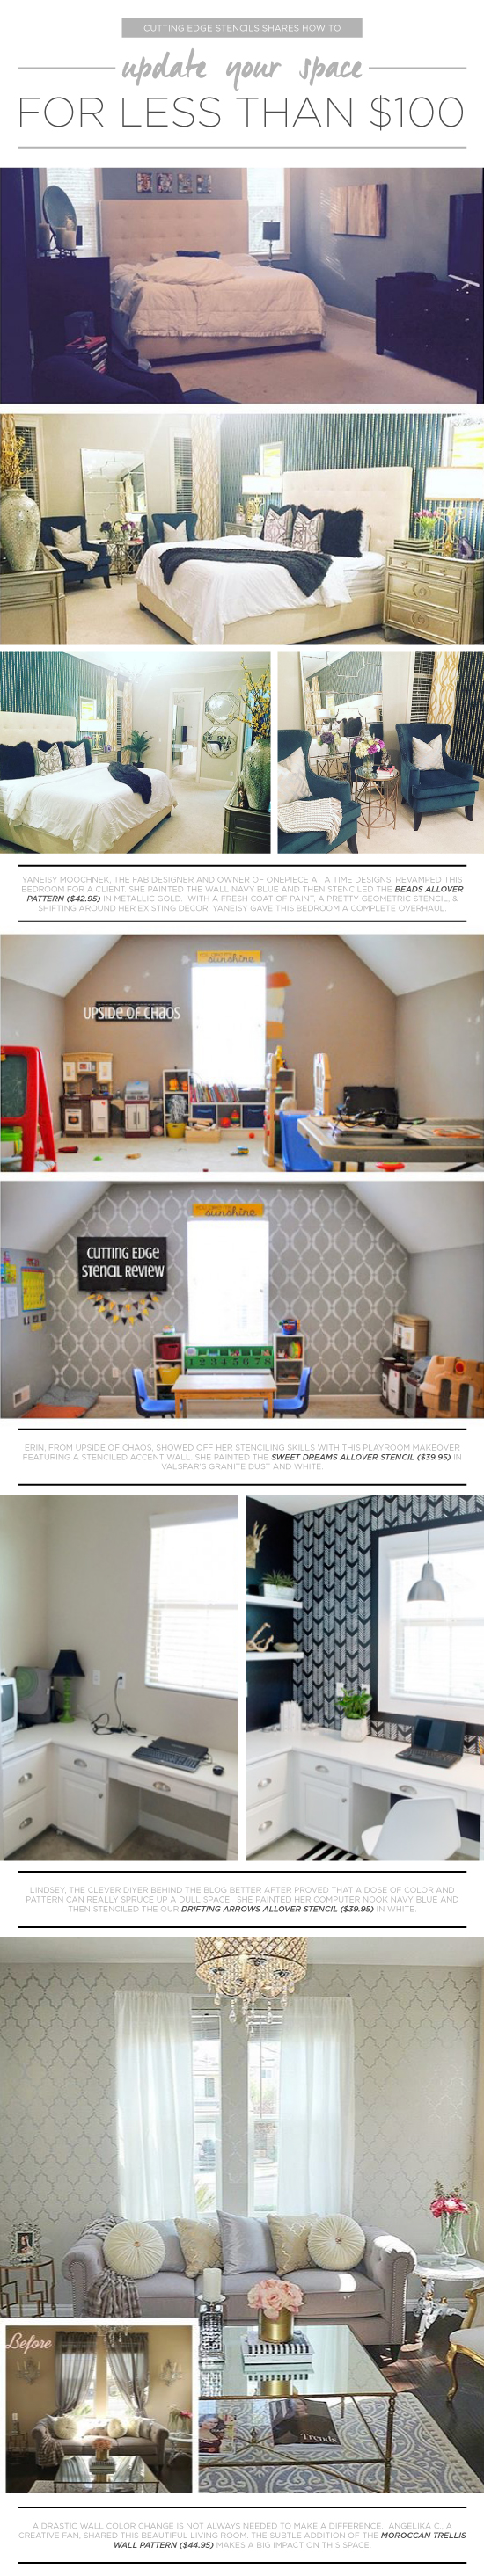 Cutting Edge Stencils shares how to update a room for less $100 using paint and stencils. http://www.cuttingedgestencils.com/wall-stencils-stencil-designs.html